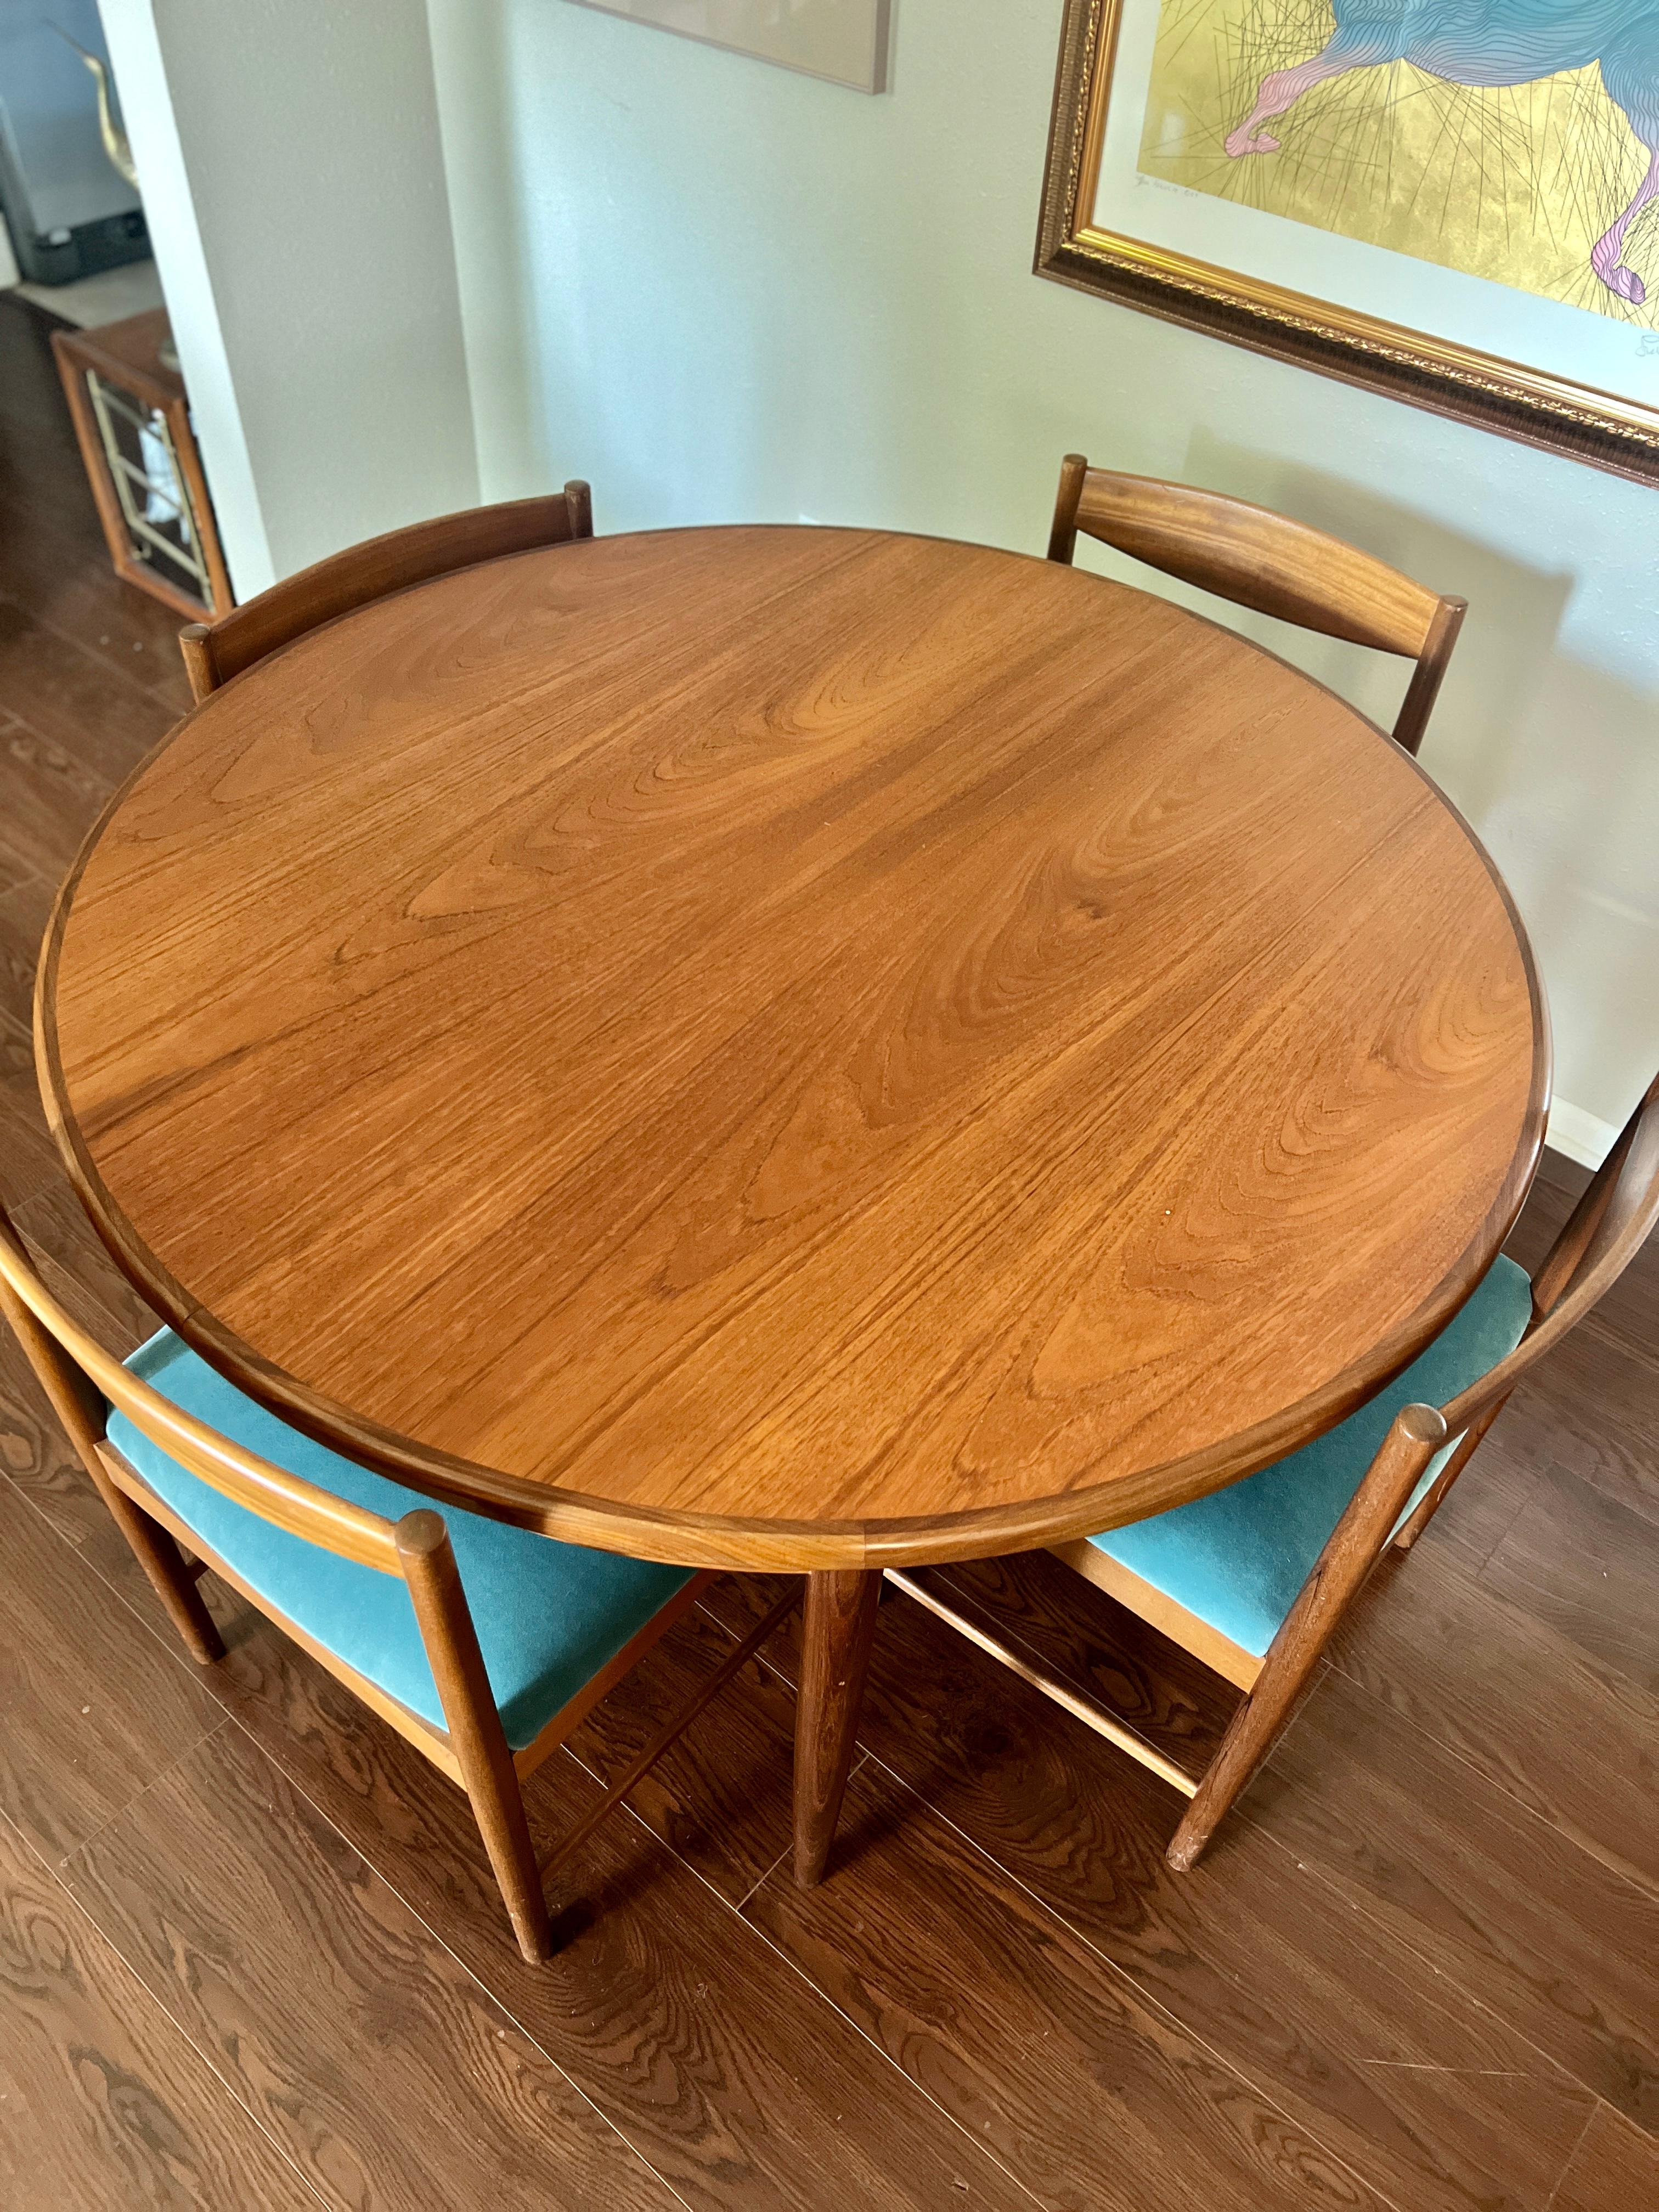 Mid-20th Century A MCM round teak dining table by G plan, with one 18